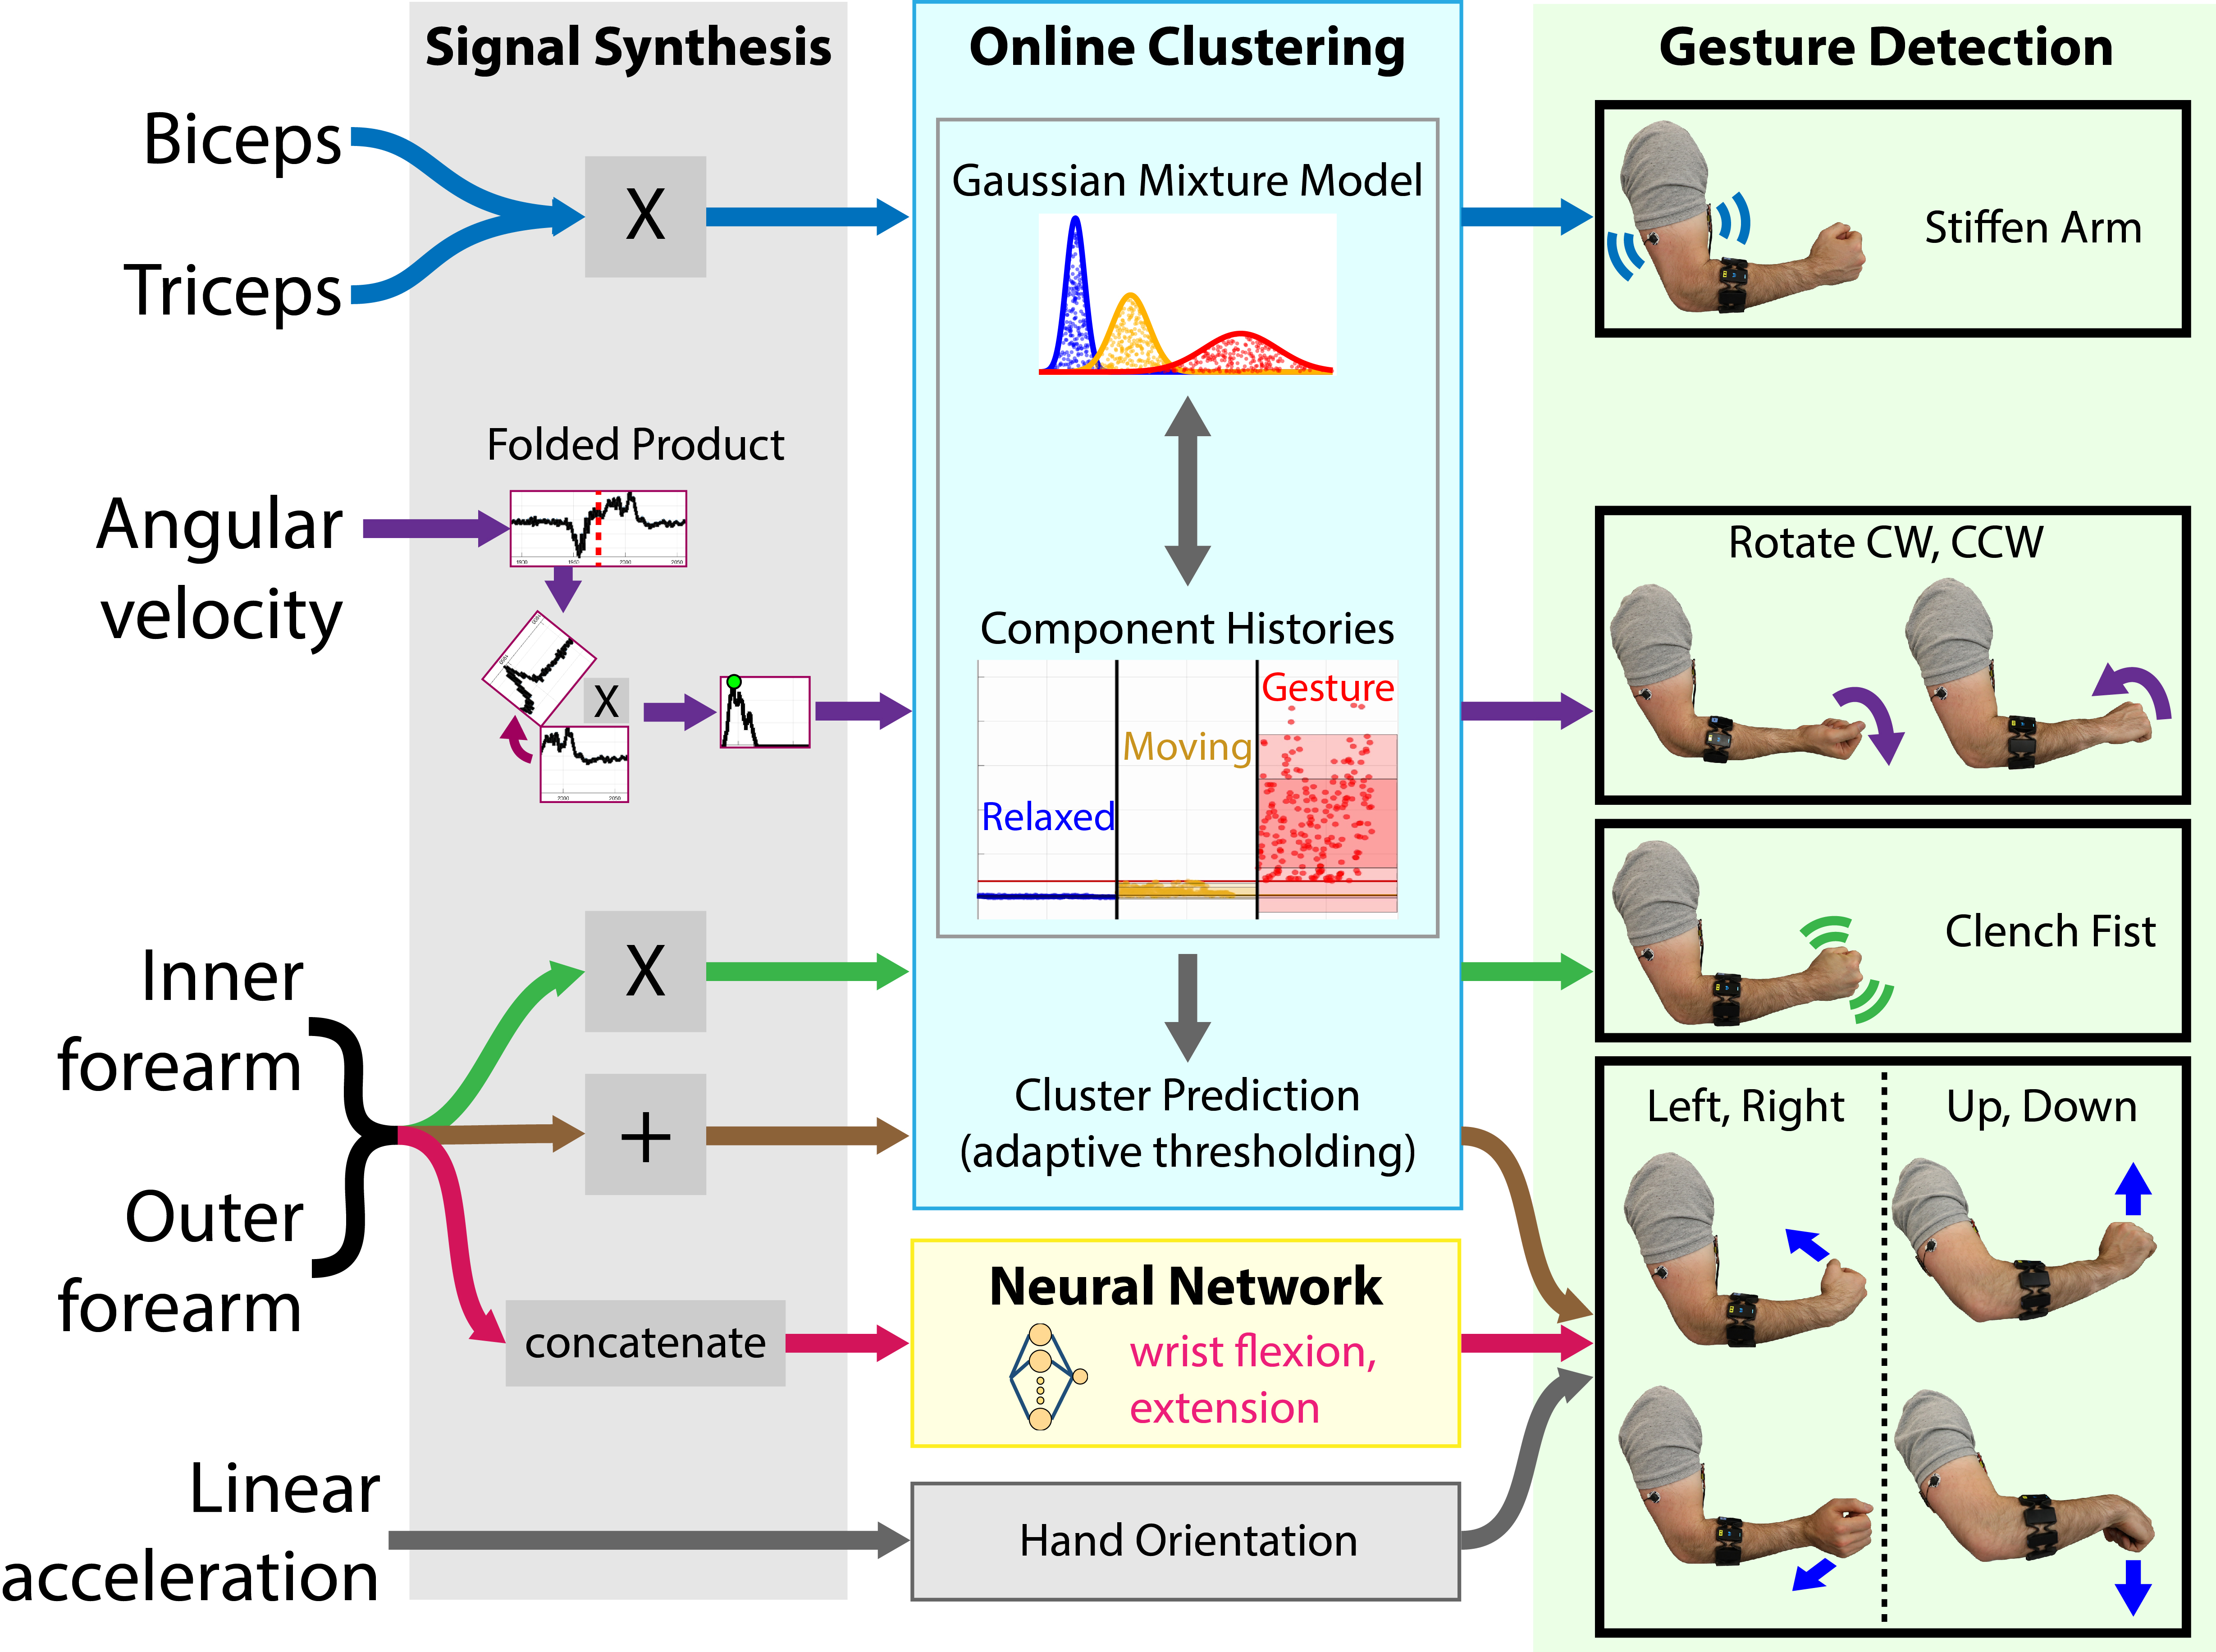 Unsupervised and supervised machine learning pipelines classify 8 gestures from 3 wearable muscle and motion sensors